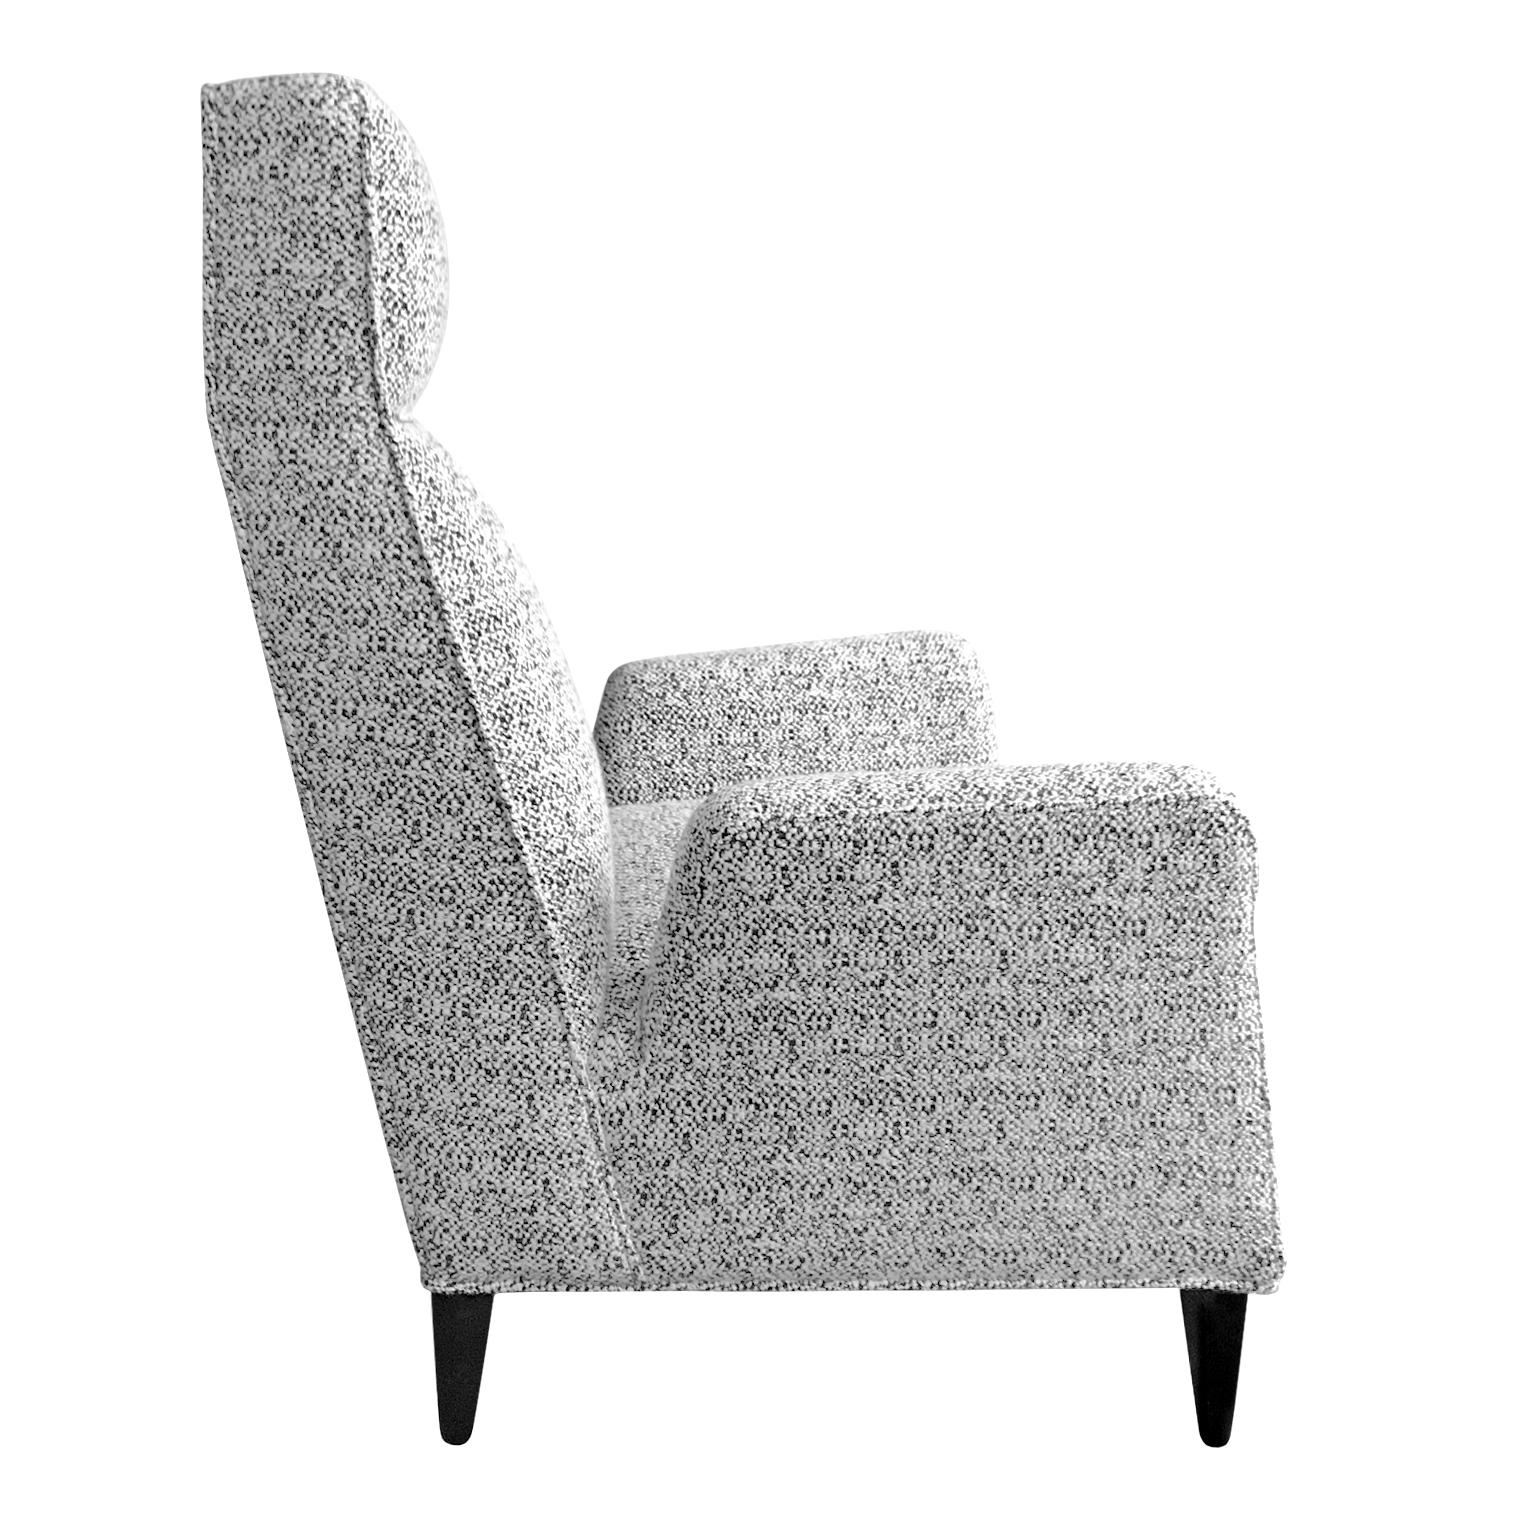 FLAIR Home collection custom Torino high back chair in black and white bouclé